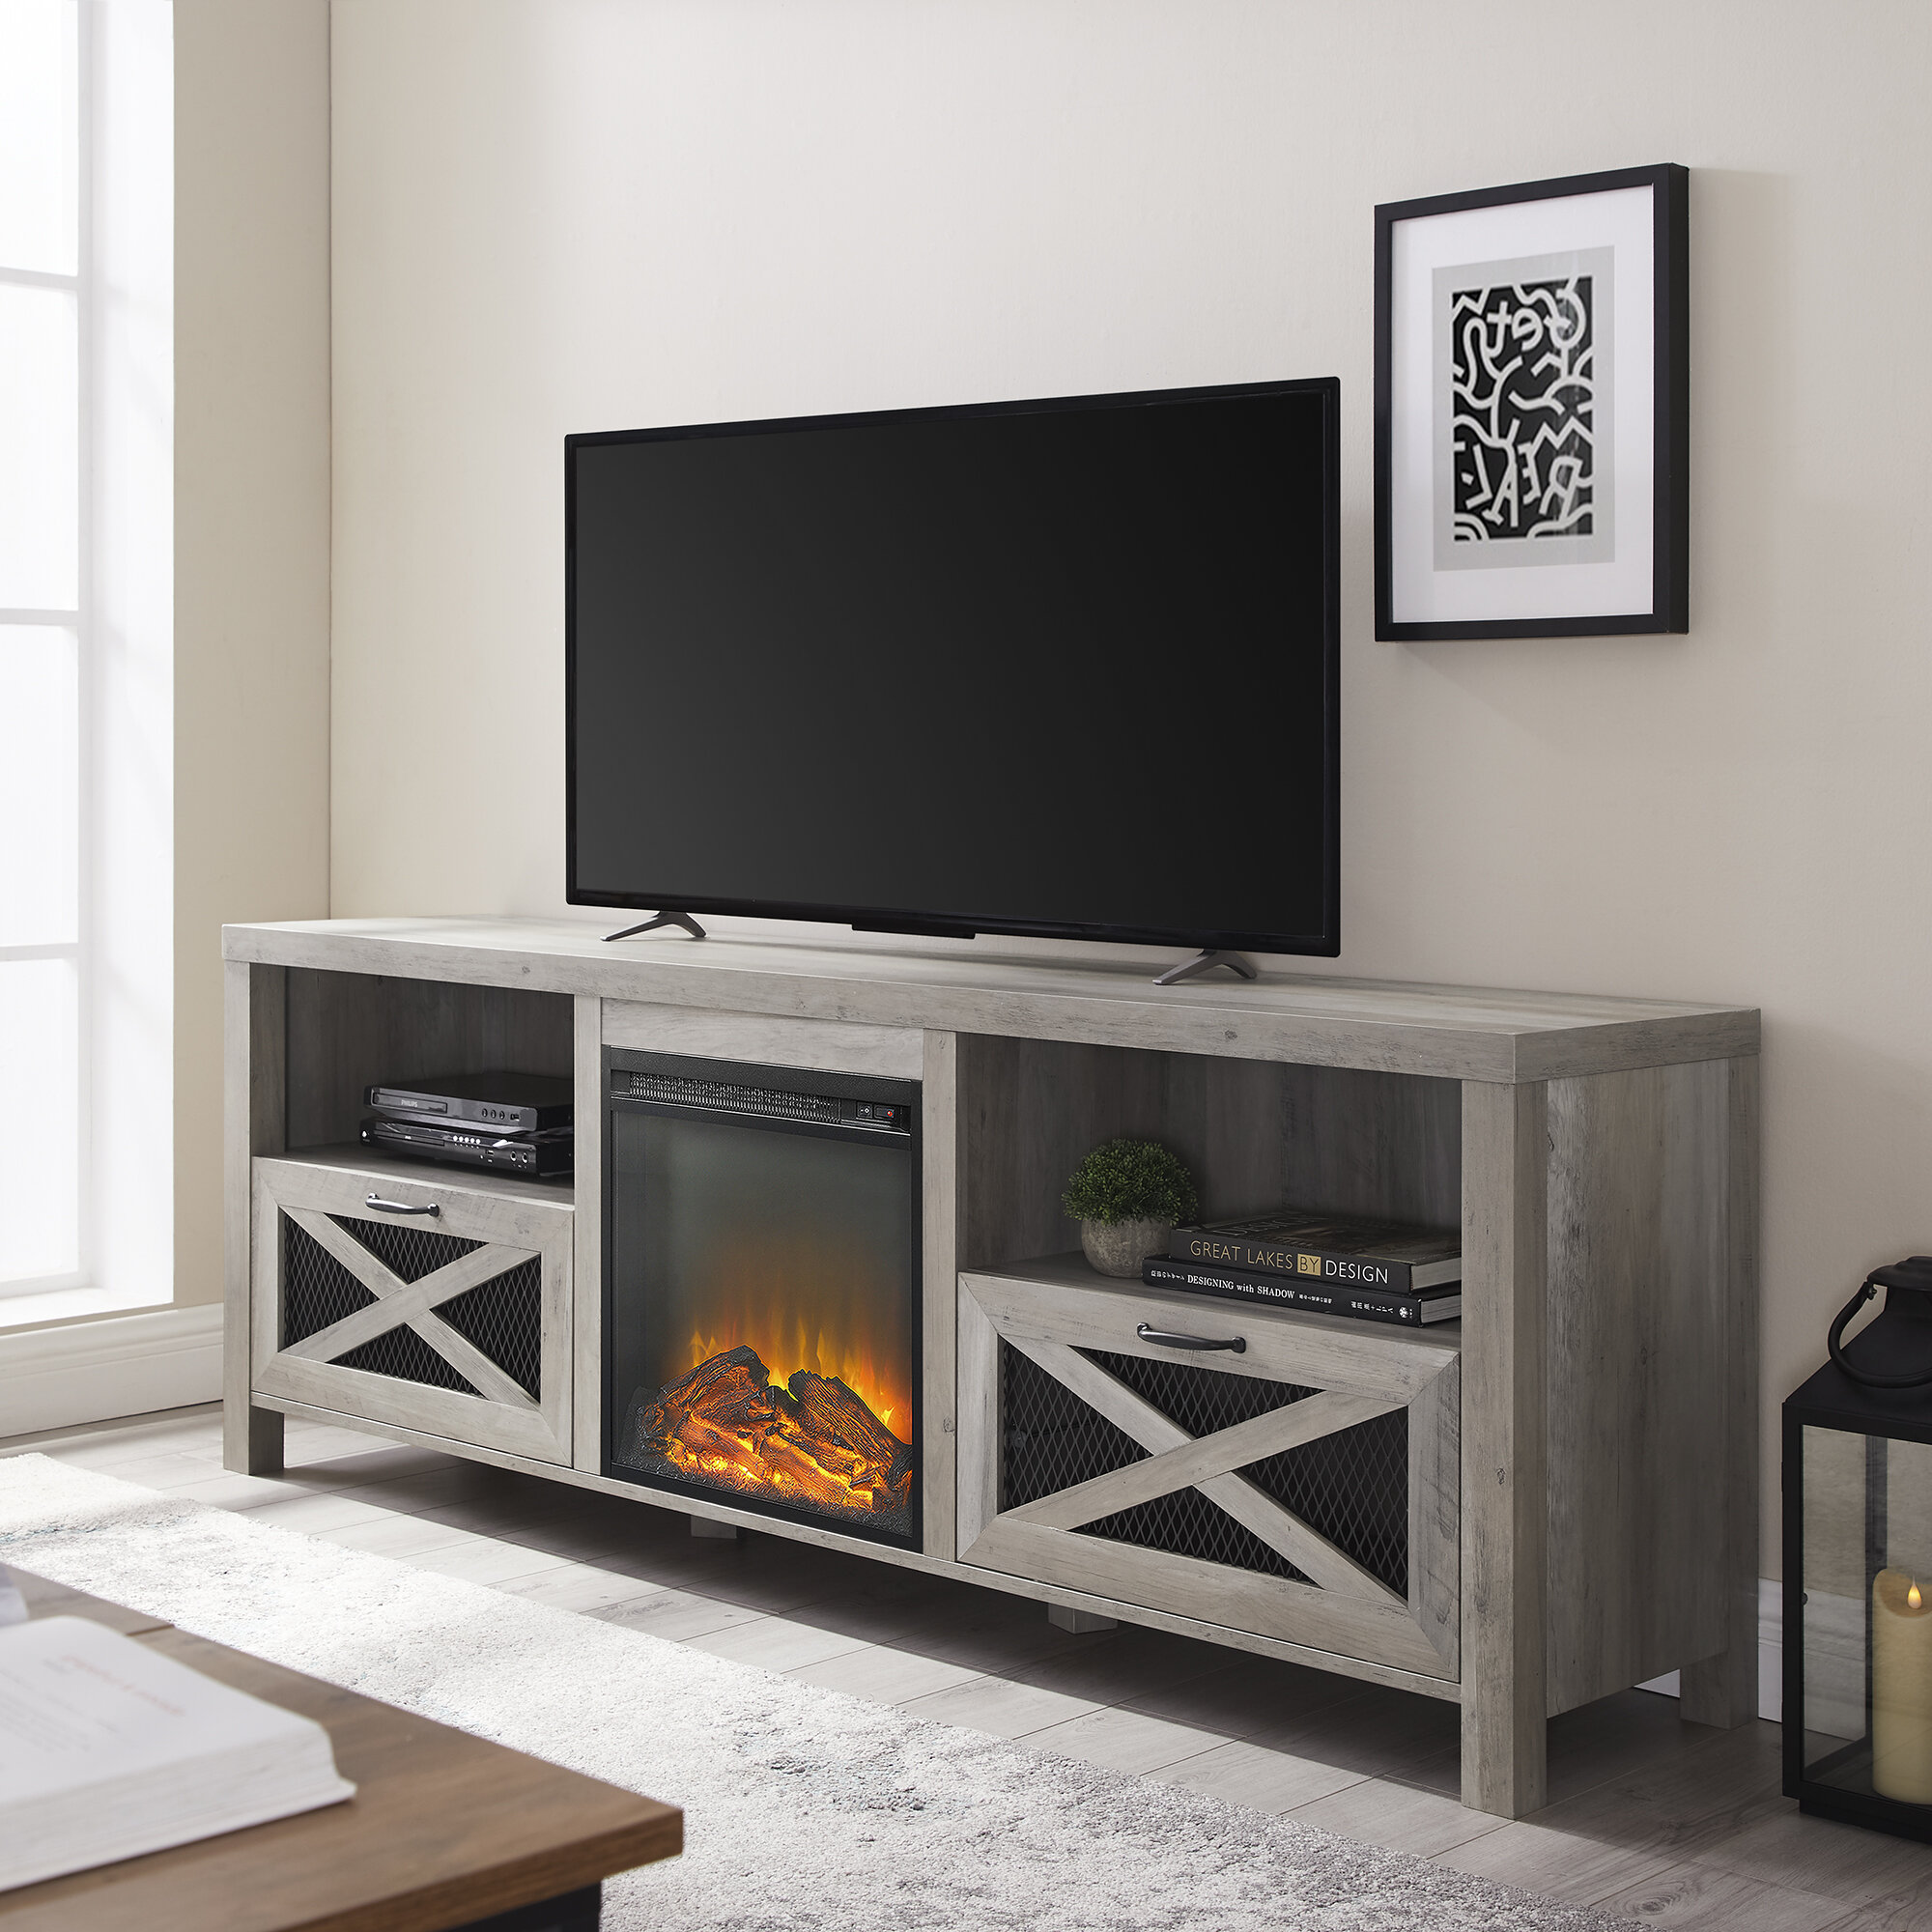 60 Inch Tall Electric Fireplace Awesome Tansey Tv Stand for Tvs Up to 70" with Electric Fireplace